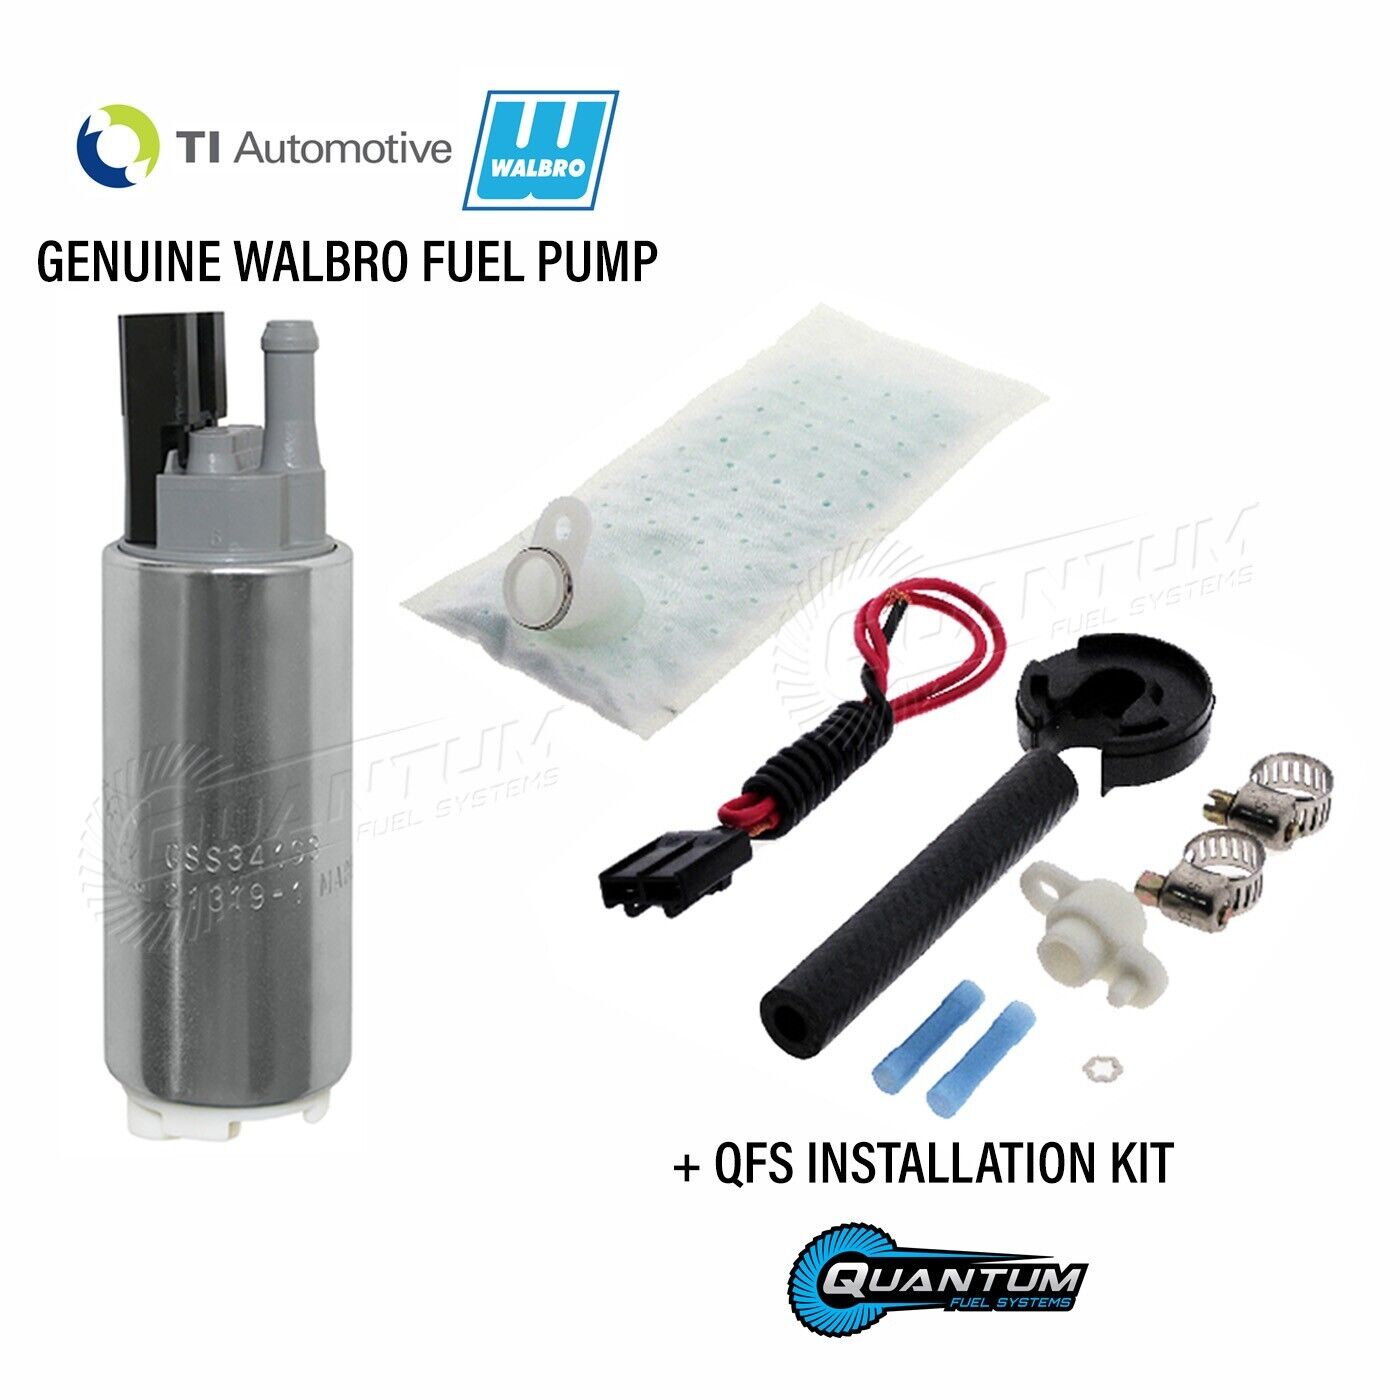 GENUINE WALBRO/TI GSS341 255LPH Fuel Pump + QFS Kit for 1986-1995 Acura Legend